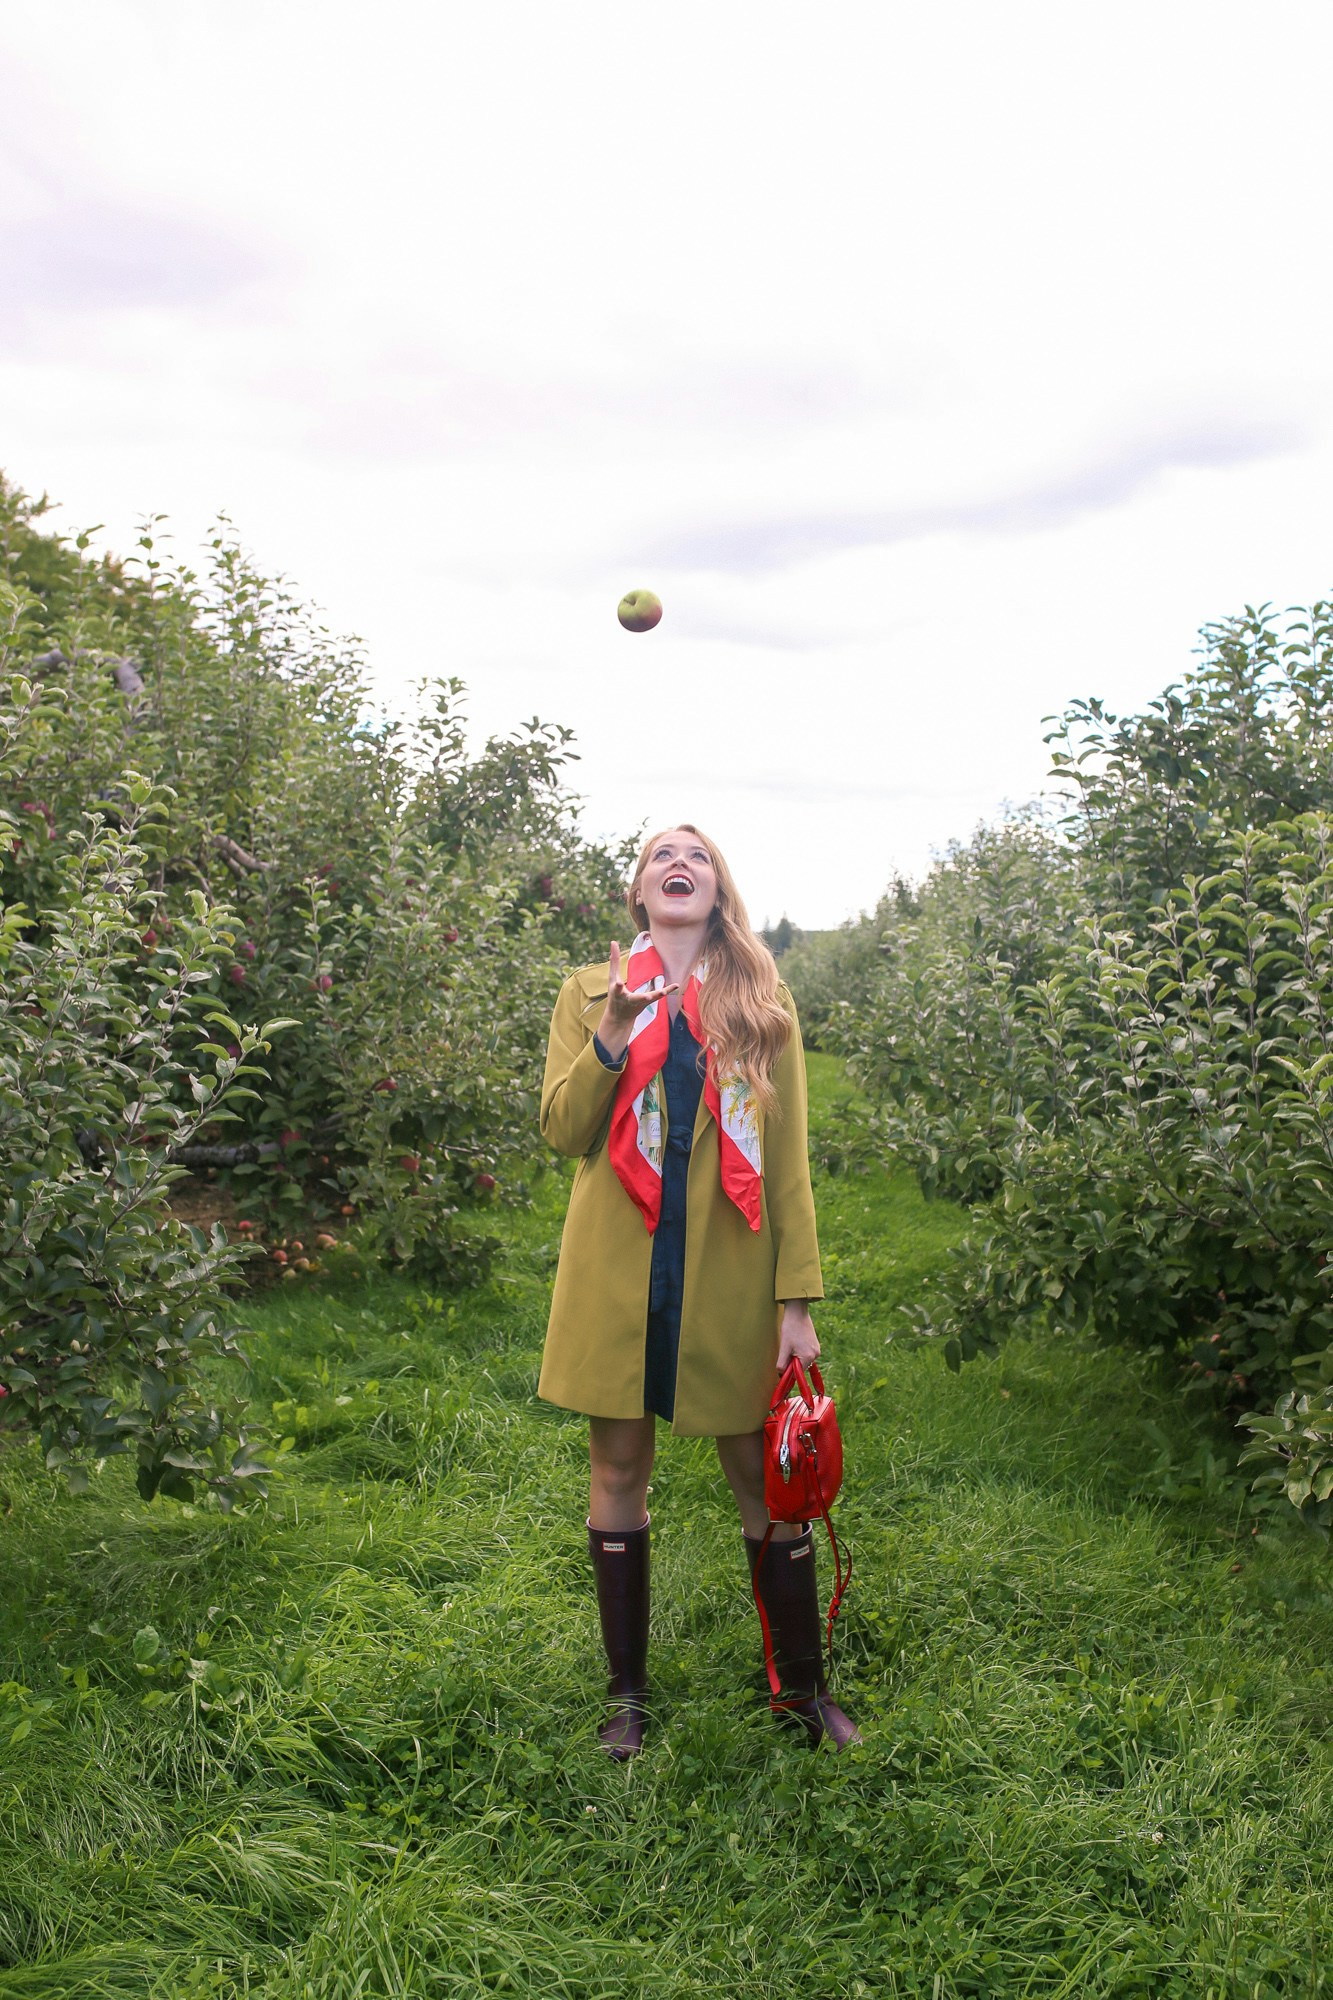 Apple picking near Toronto: Applewood Farm Winery. I wore a chartreuse trench and silk scarf and Hunter Boots for a chic, practical fall outfit.